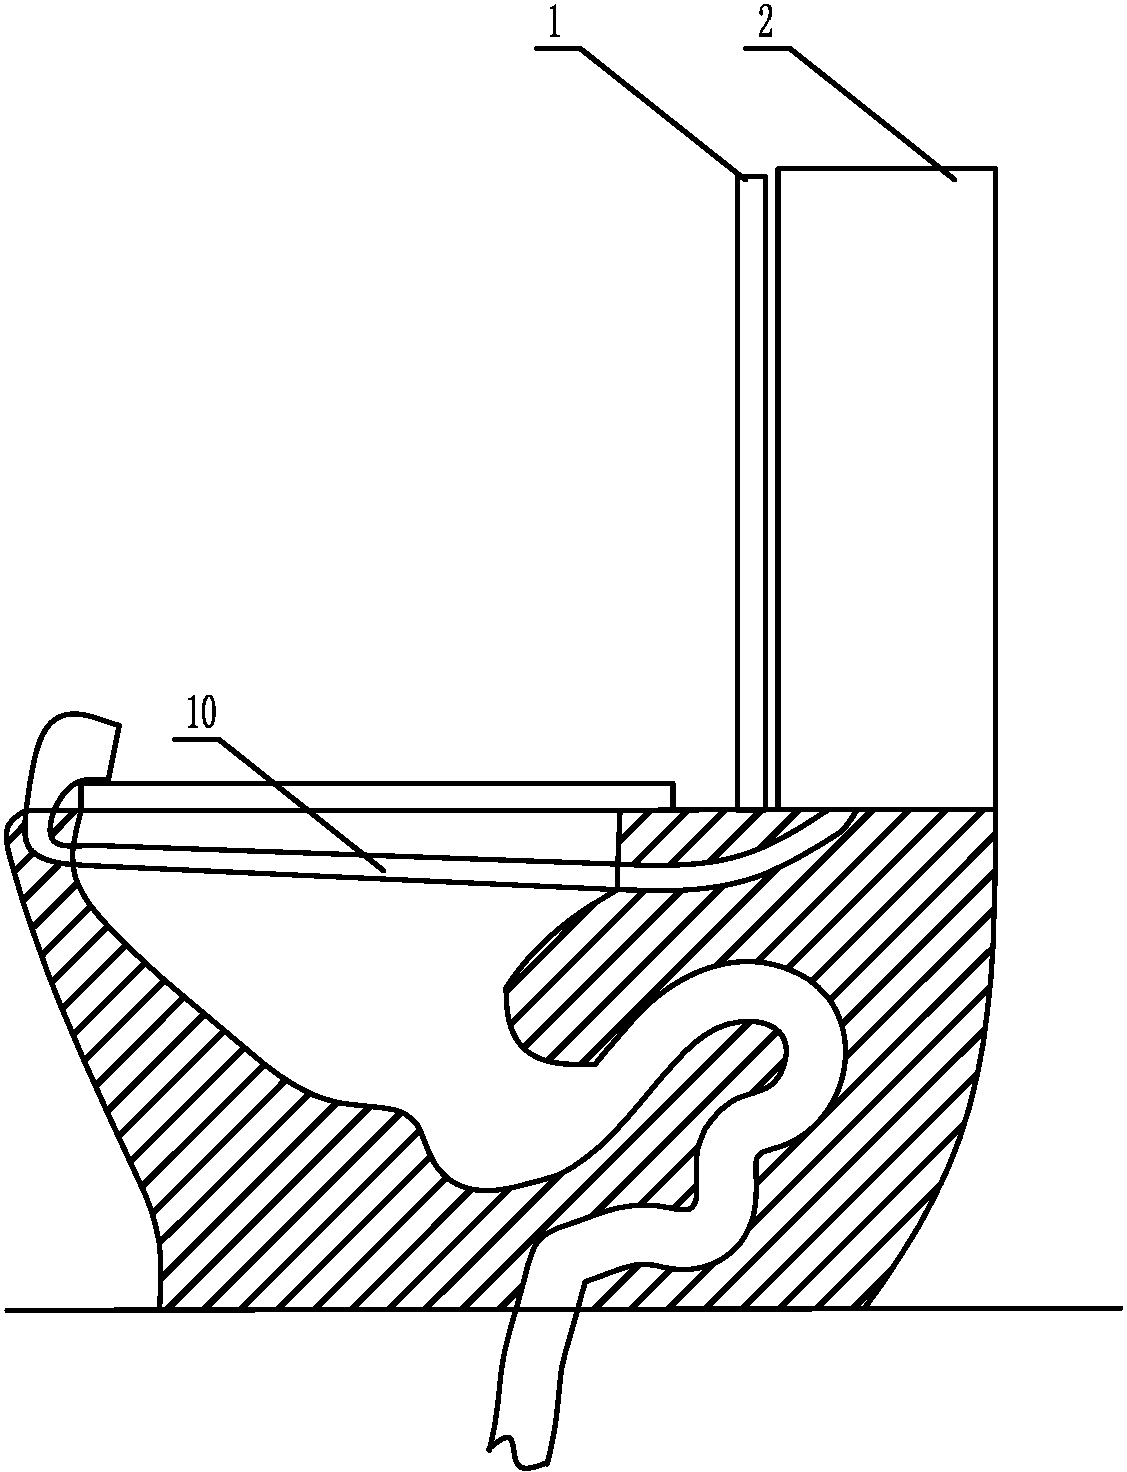 Pedestal pan capable of facilitating excretion